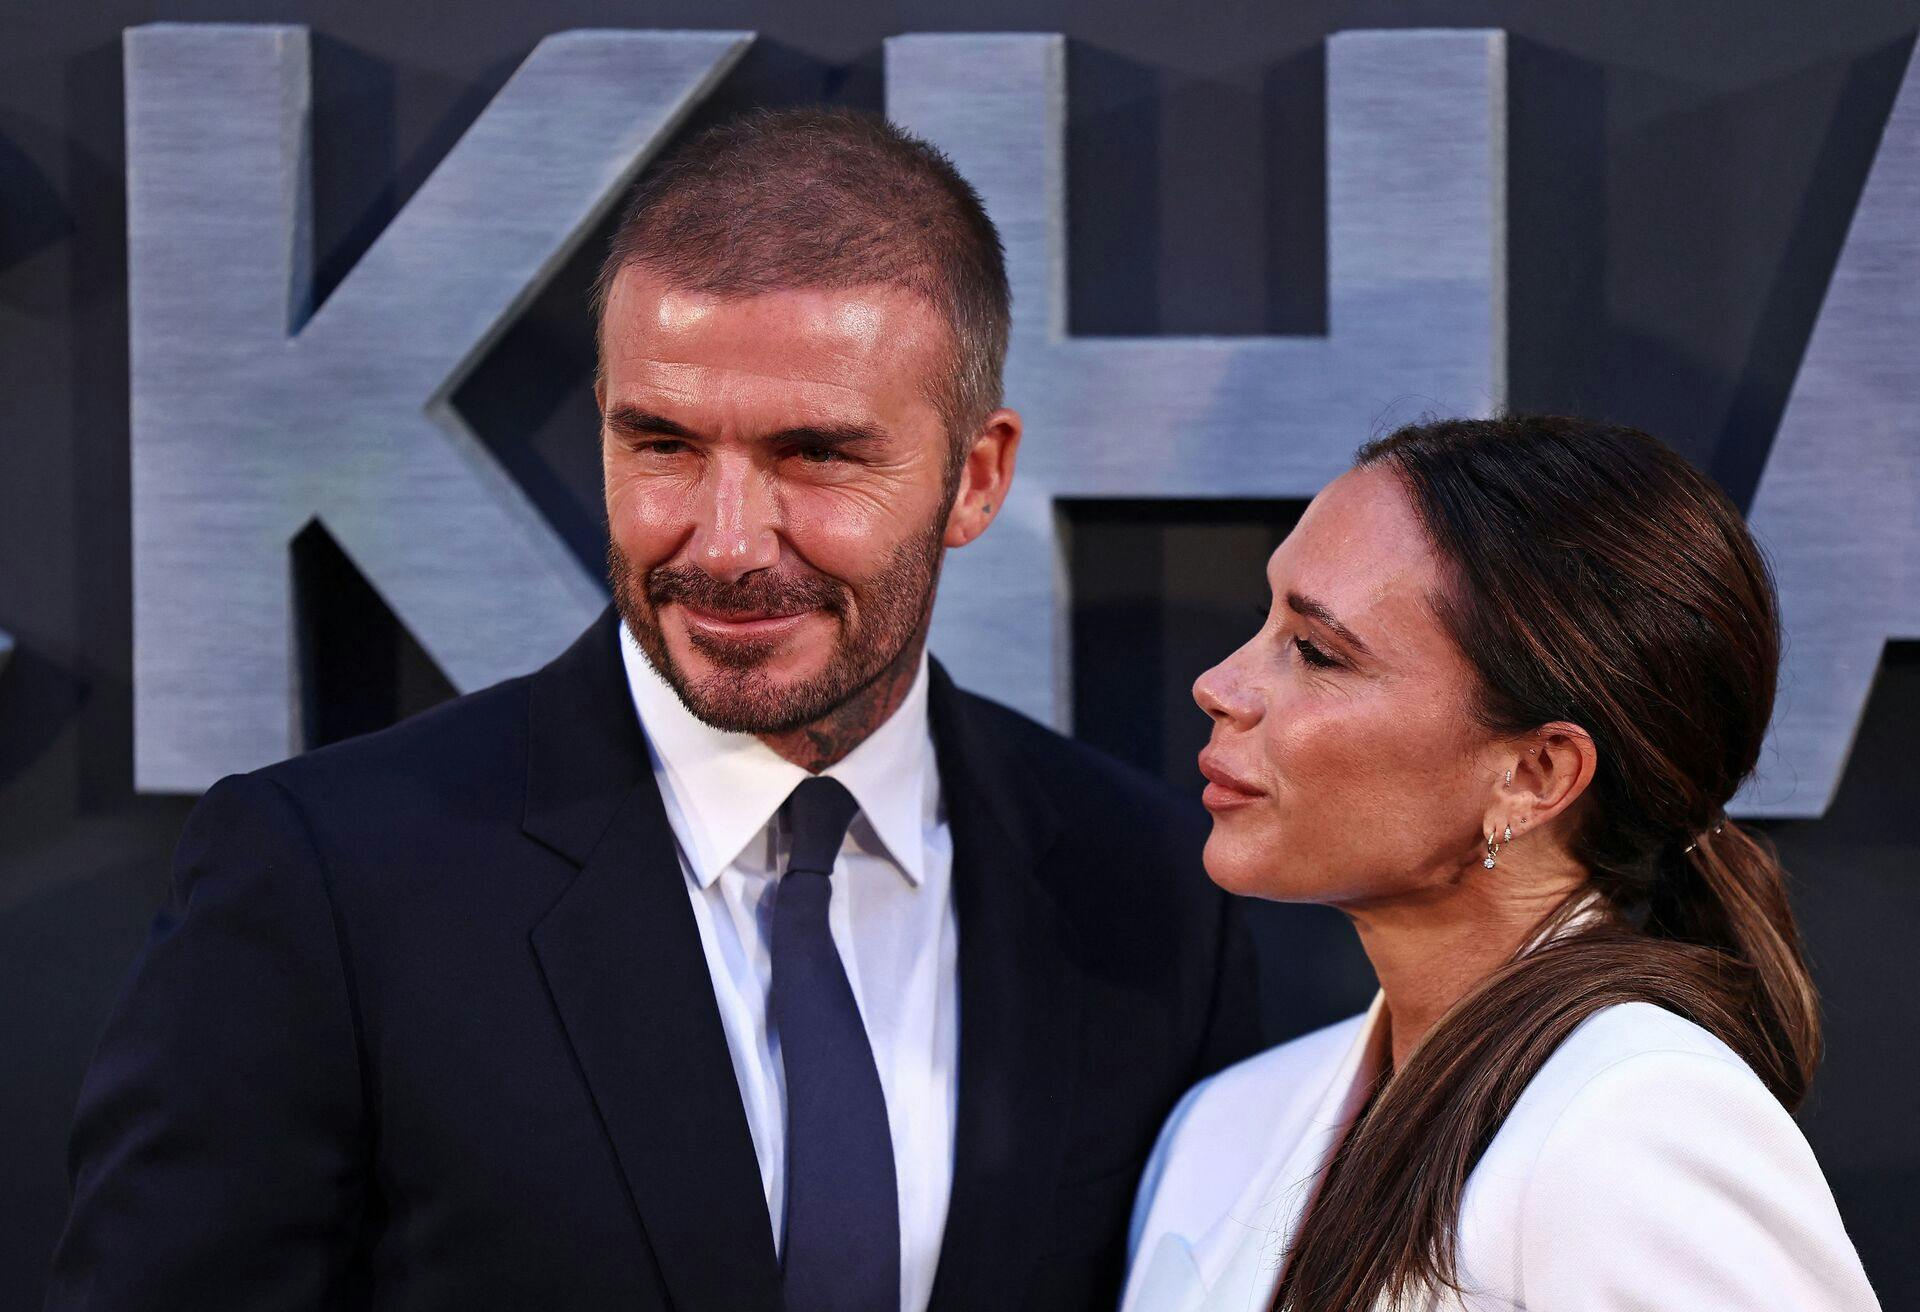 Former England footballer David Beckham and his wife Victoria Beckham pose on the red carpet upon arrival to attend the Premiere of "Beckham" in London on October 3, 2023. (Photo by HENRY NICHOLLS / AFP)